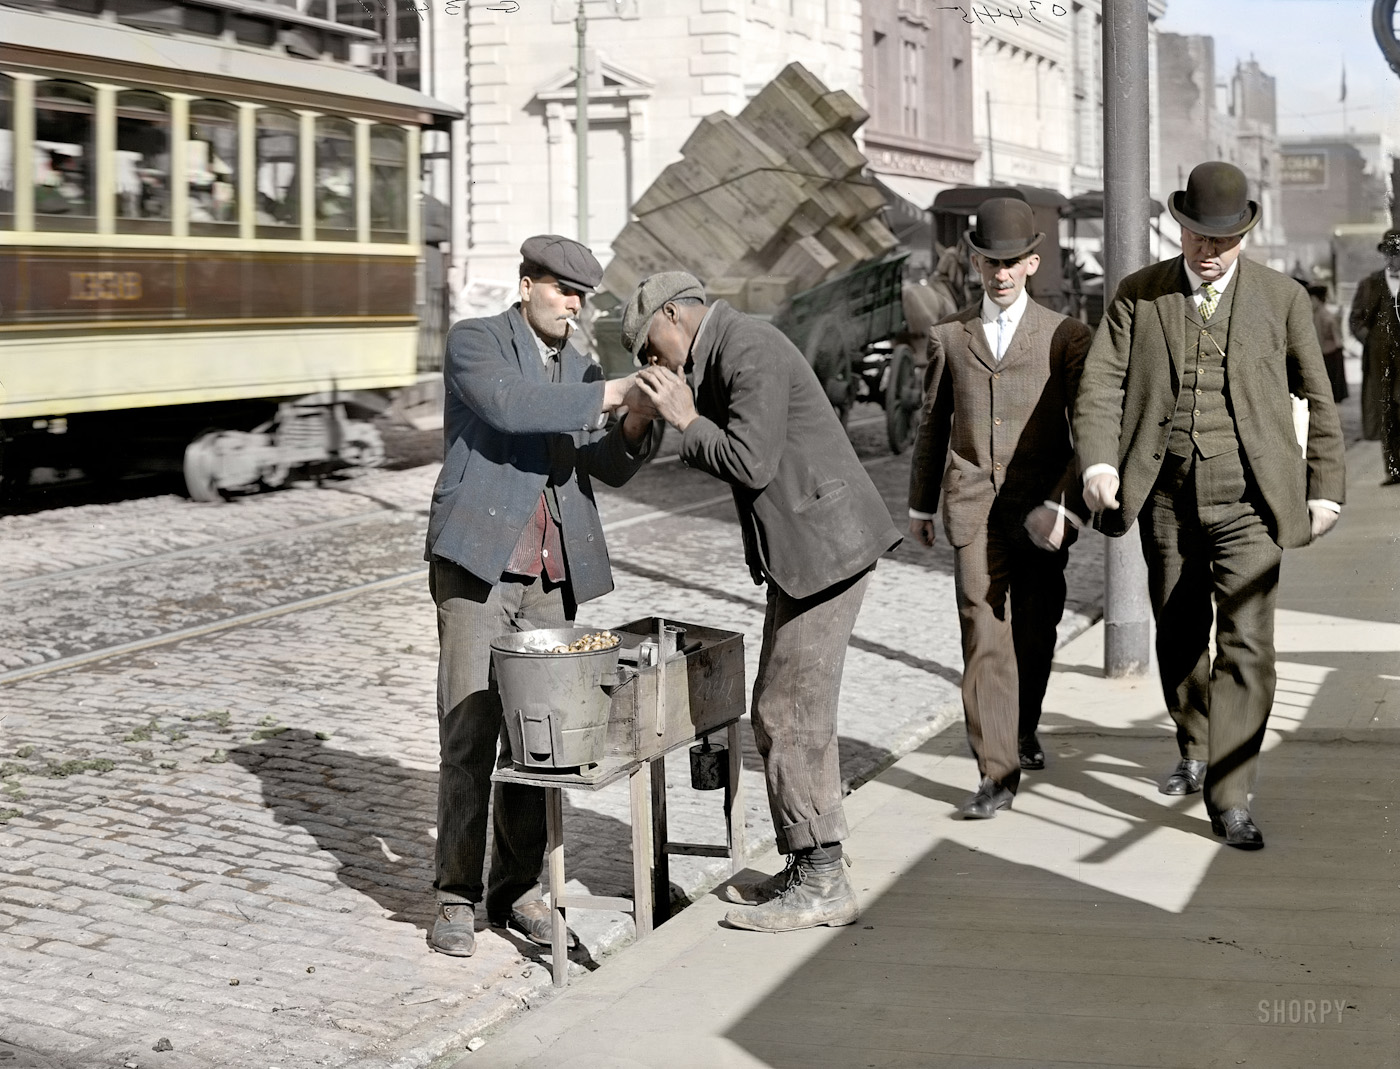 Colorized version of "Chestnuts Roasting: 1905."